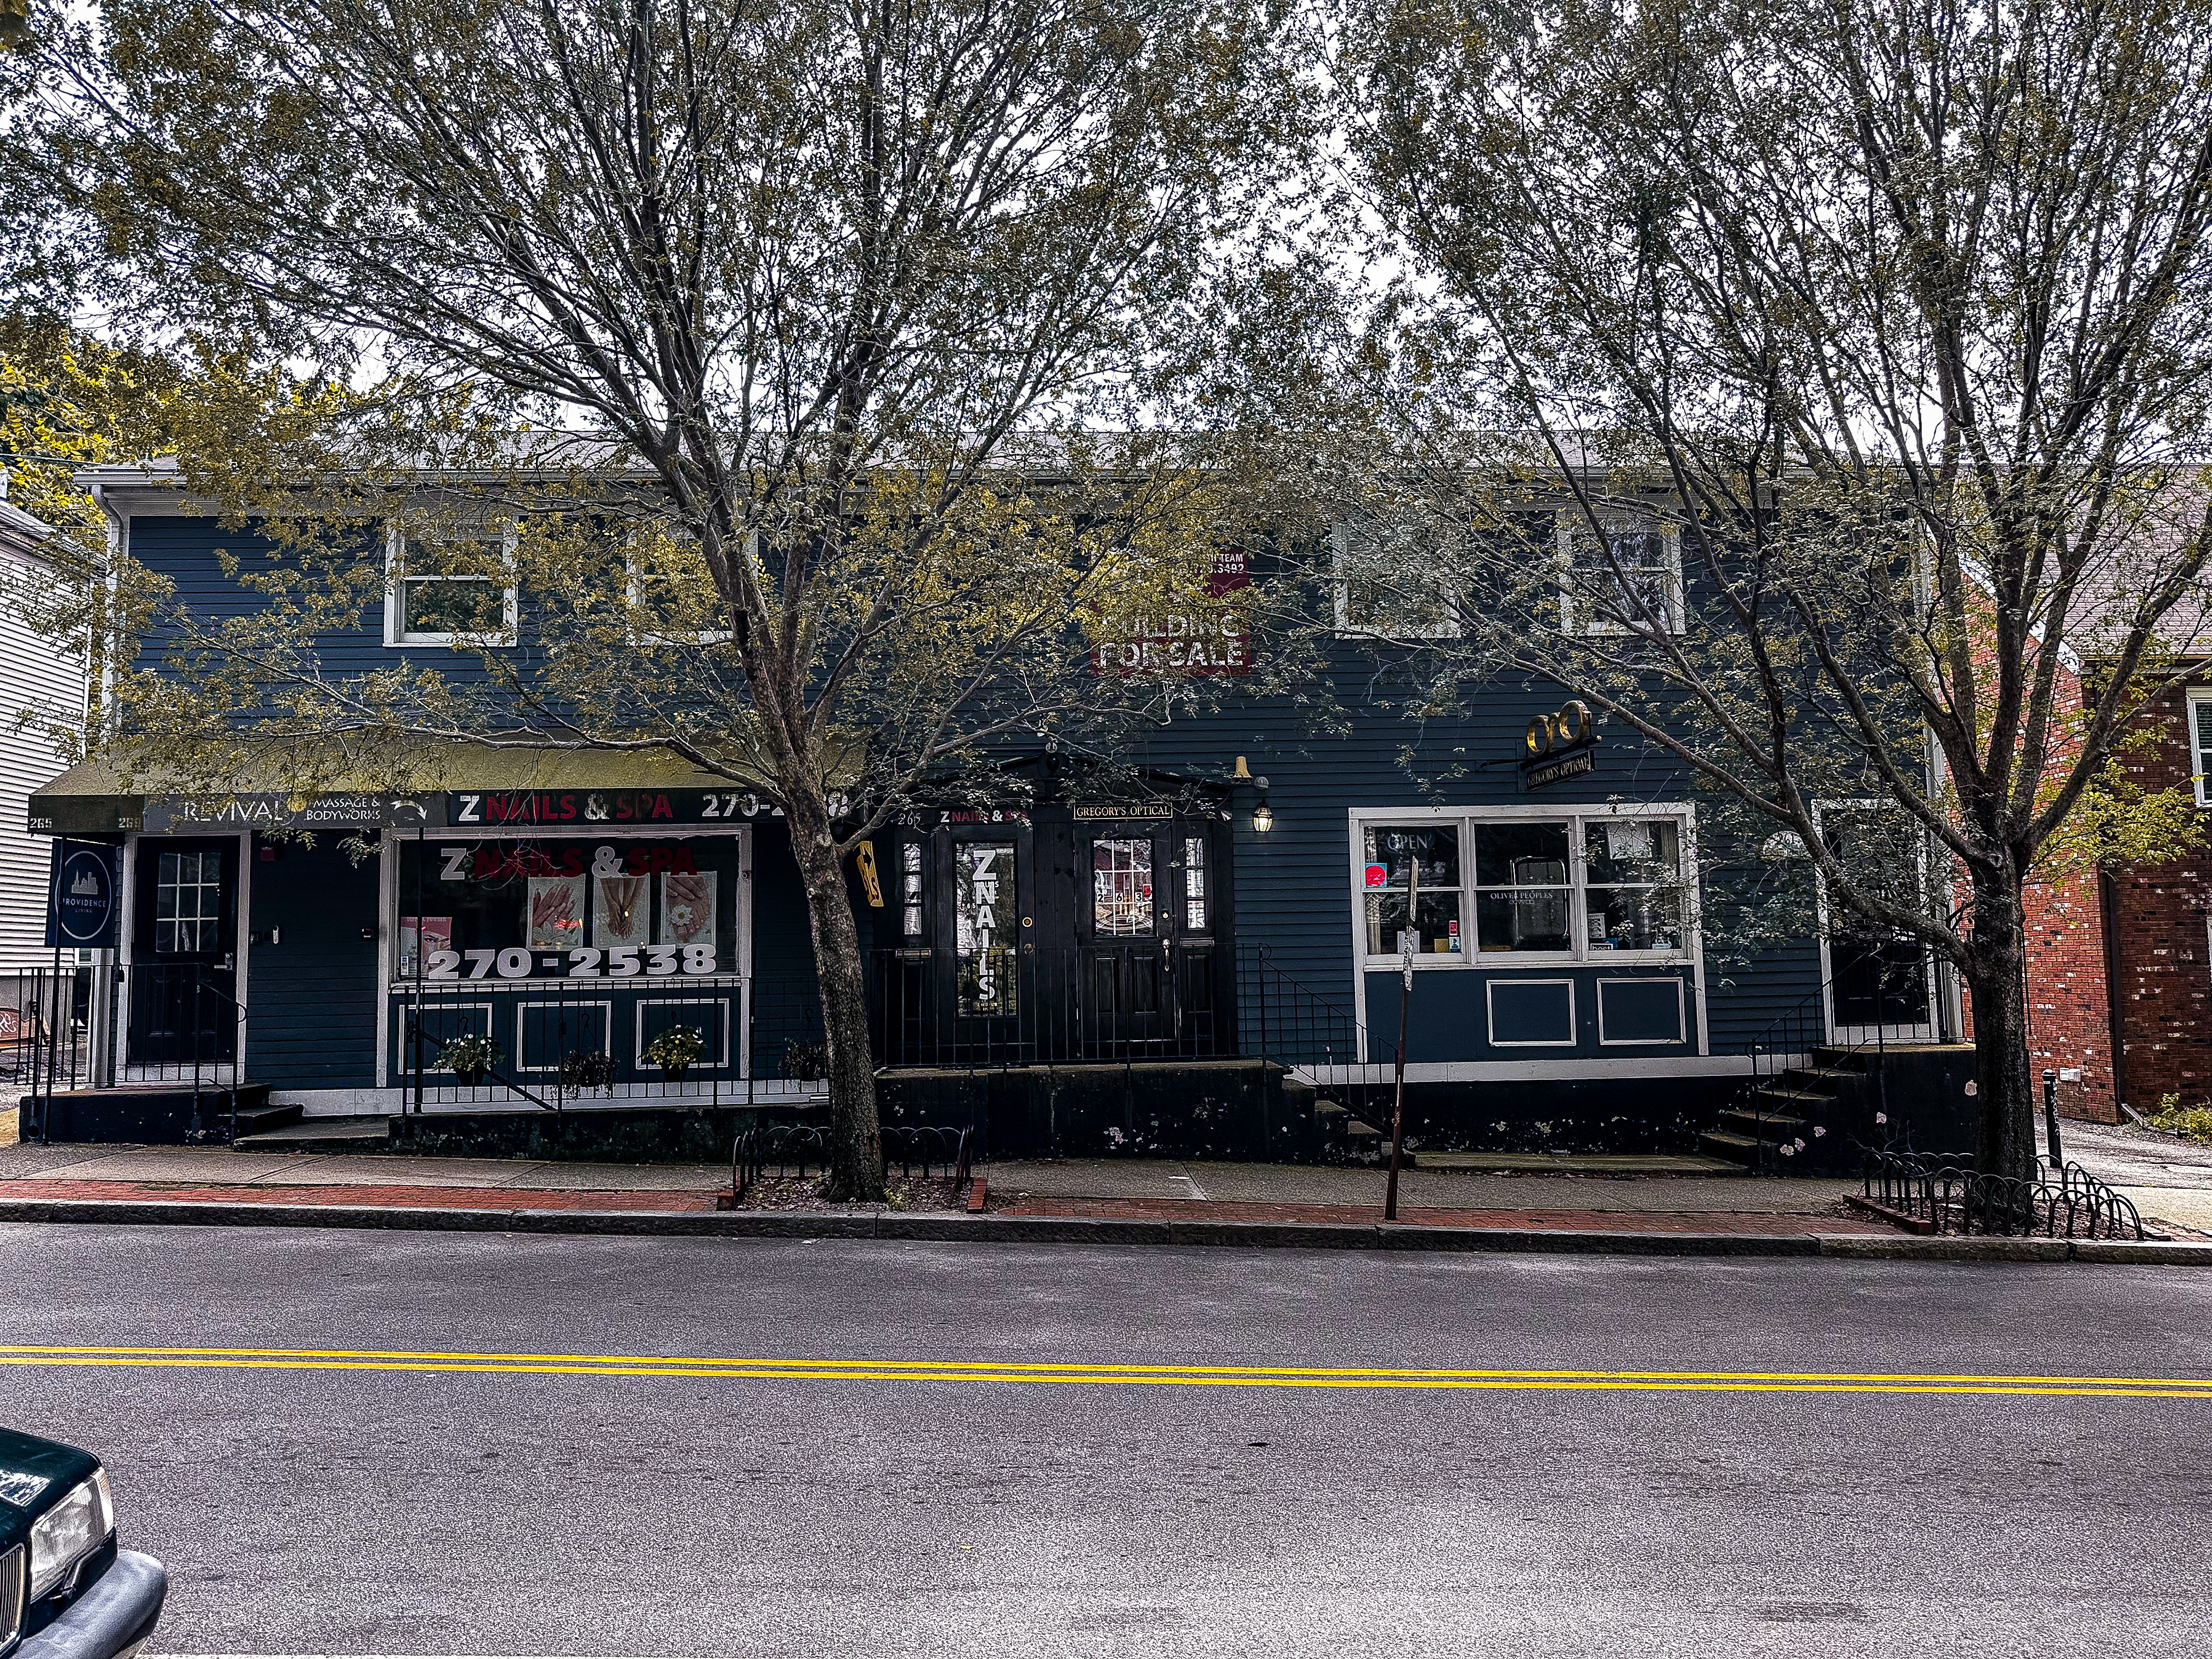 Triple Ds Changes Hands After 27 Years — Jamaica Plain Historical Society